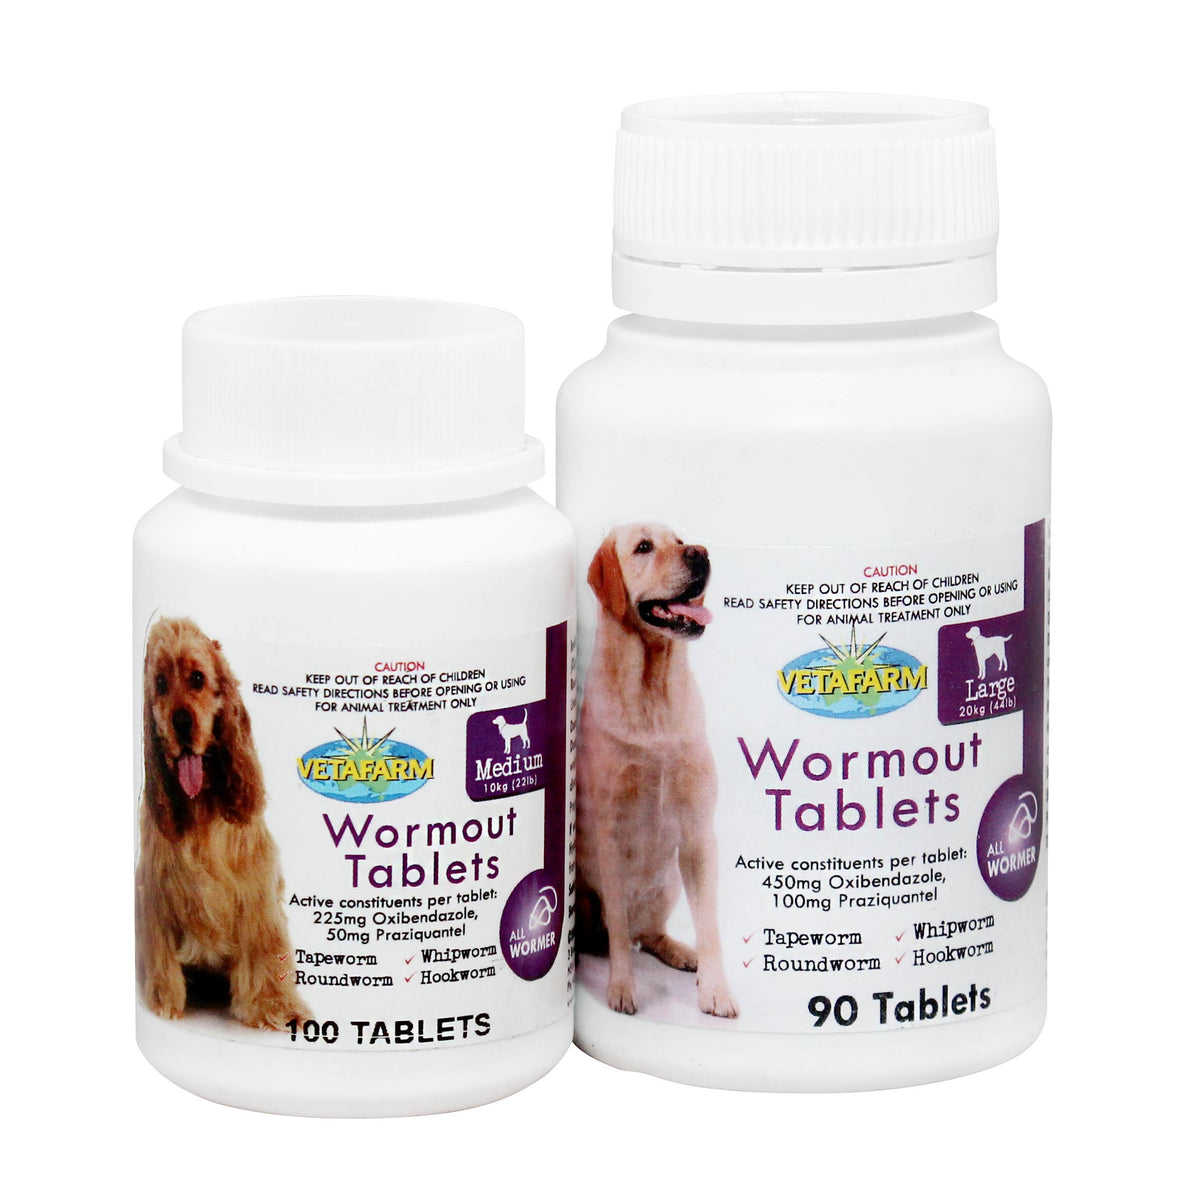 Wormout Tablets for Dogs - EXPORT ONLY